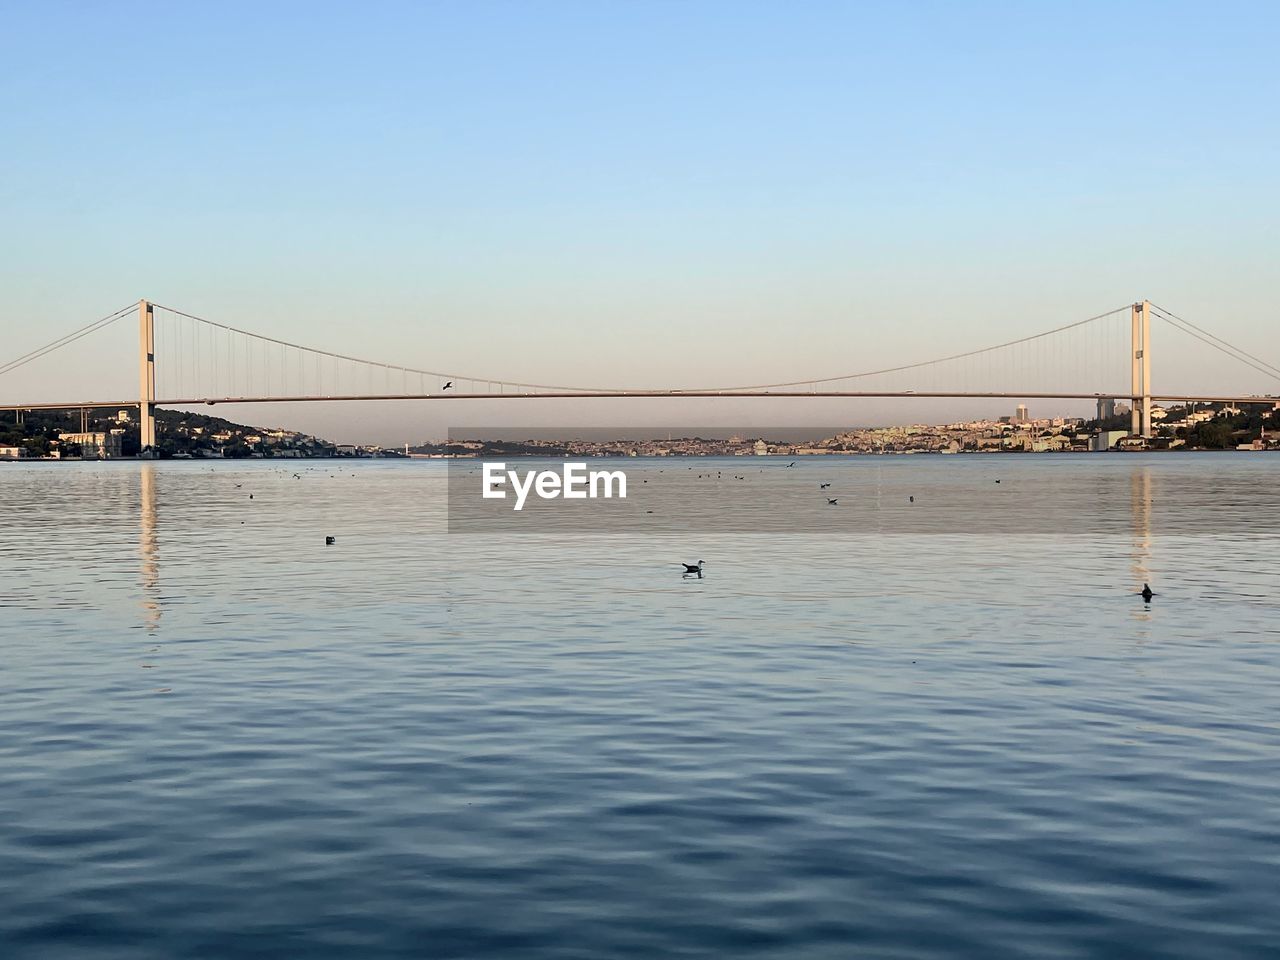 bridge, water, suspension bridge, sky, built structure, architecture, transportation, travel destinations, nature, sea, engineering, travel, copy space, tourism, clear sky, cable-stayed bridge, horizon, blue, beauty in nature, scenics - nature, tranquility, tranquil scene, shore, city, bay, bay of water, waterfront, outdoors, day, rippled, reflection, animal, dusk, animal themes, sunlight, nautical vessel, building exterior